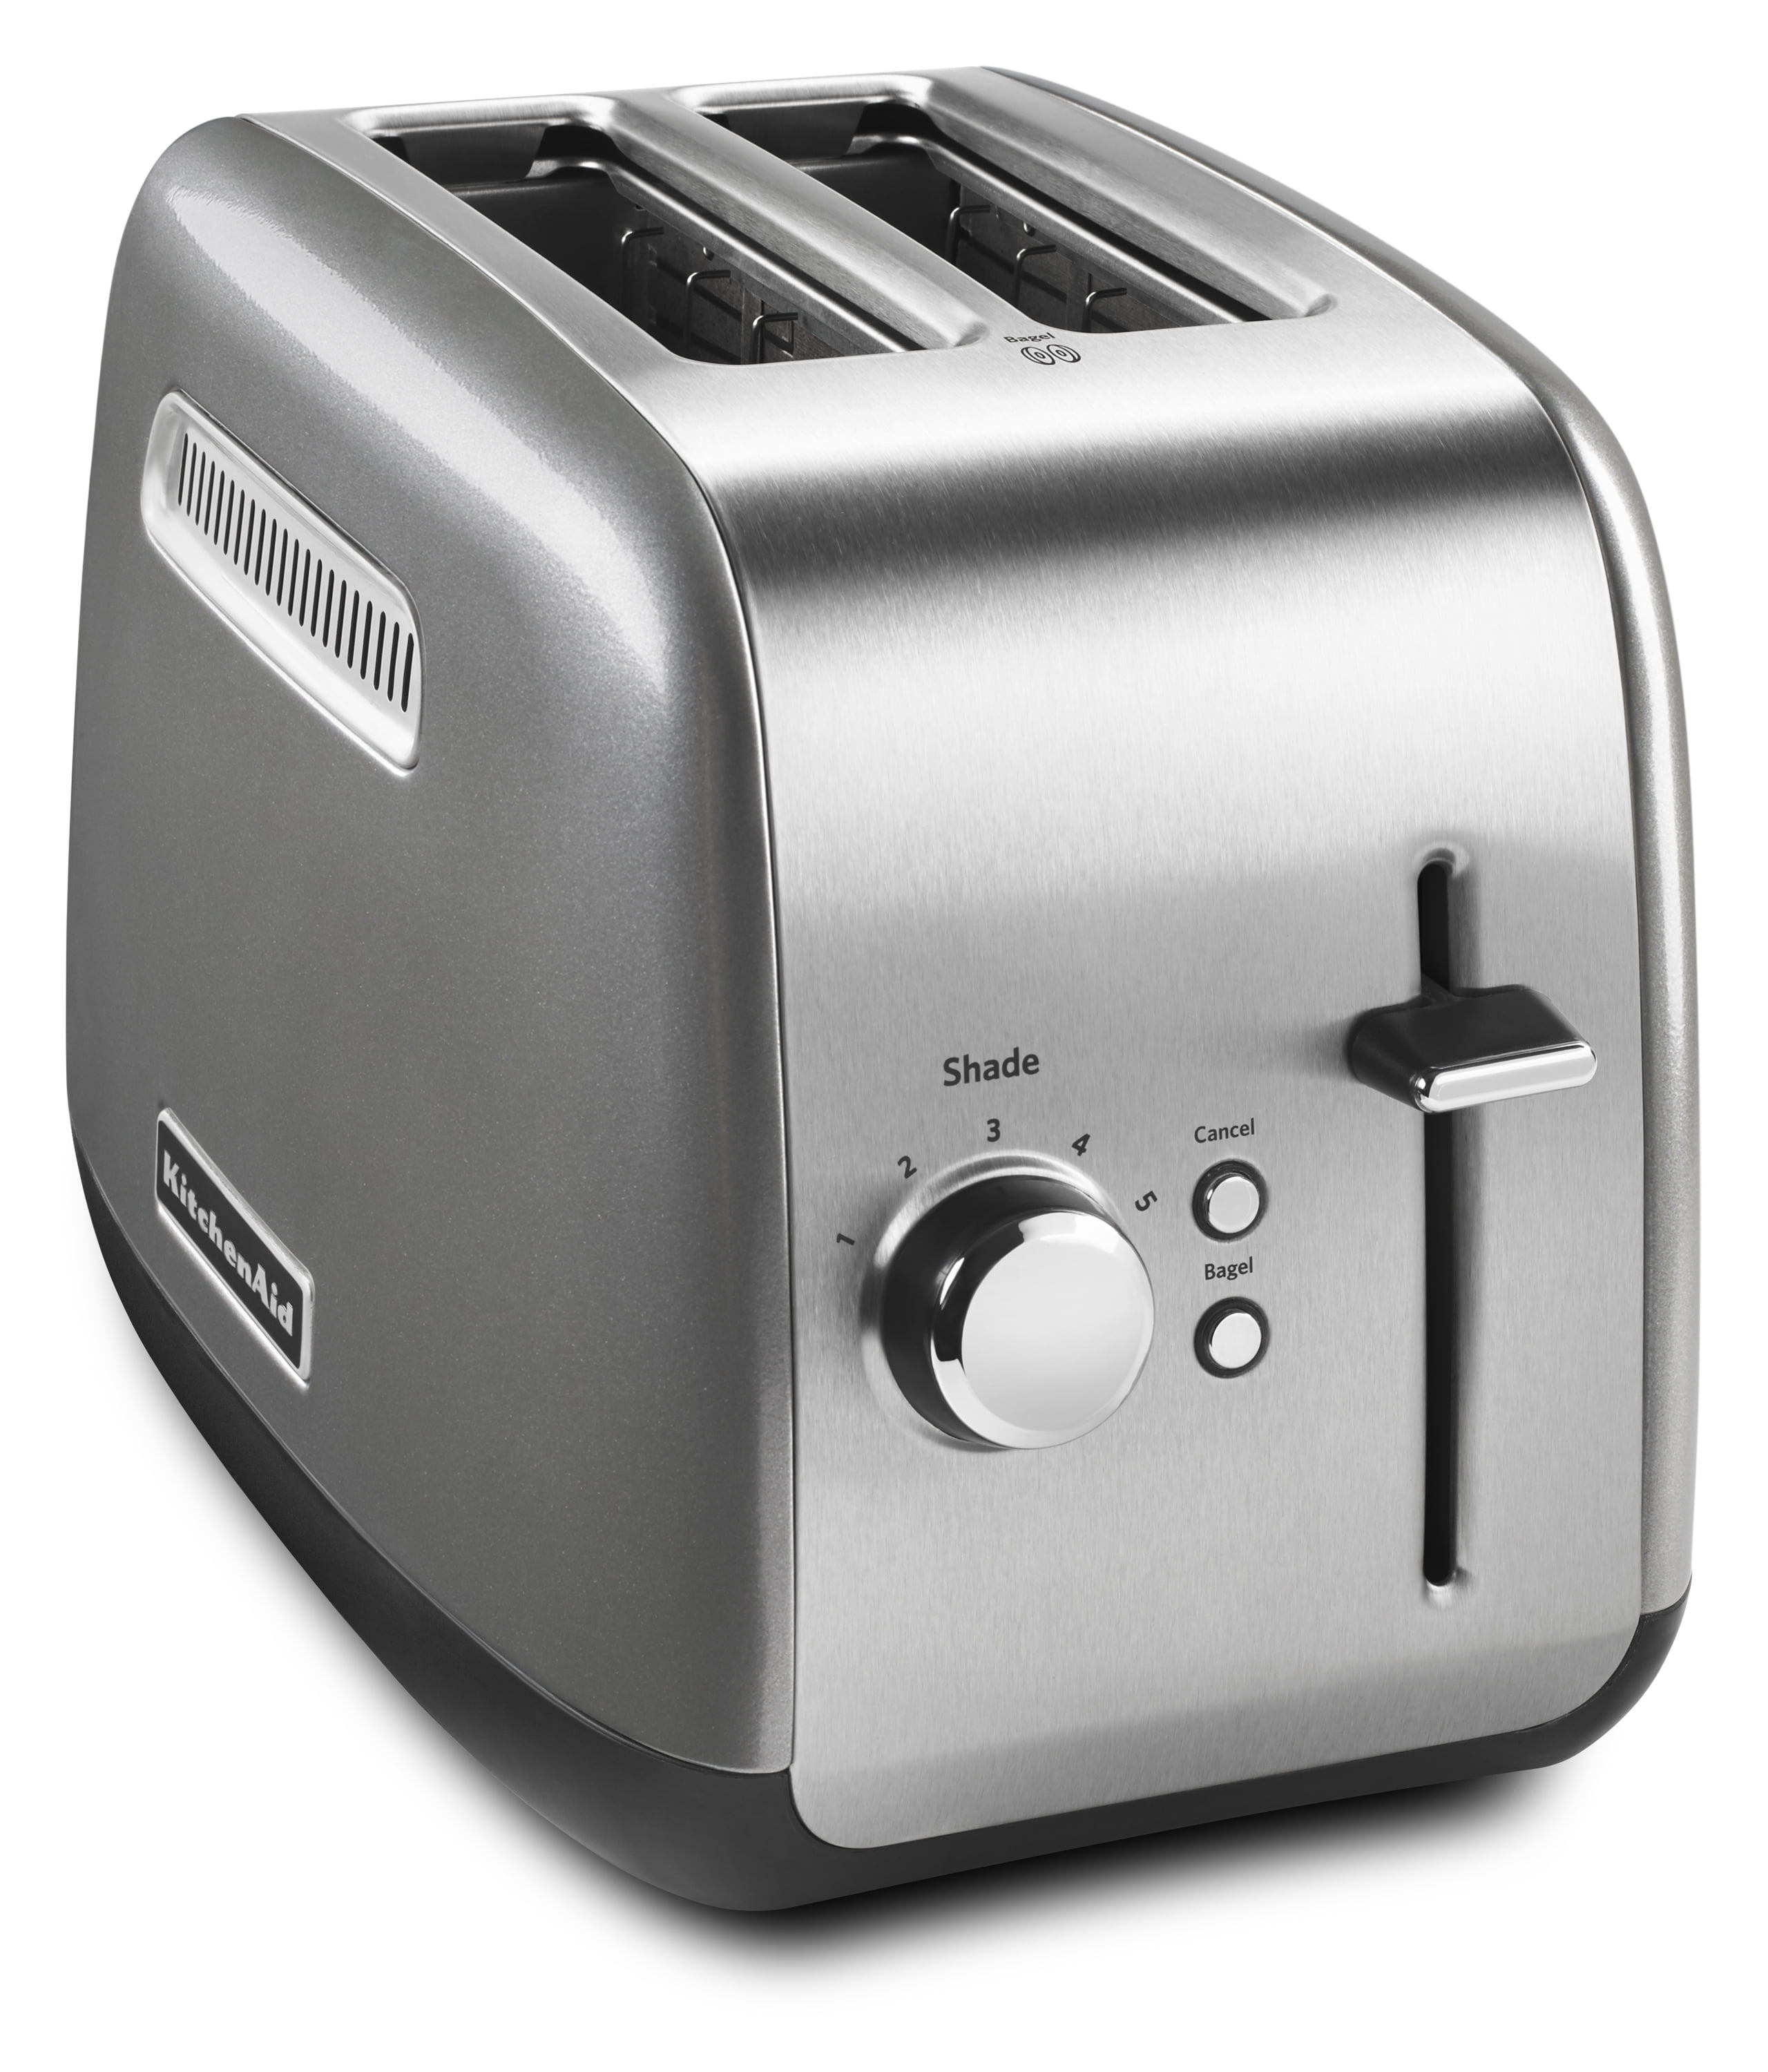 New Kitchenaid Contour Silver With Stainless Steel 2-Slice Toaster KMT2115CU